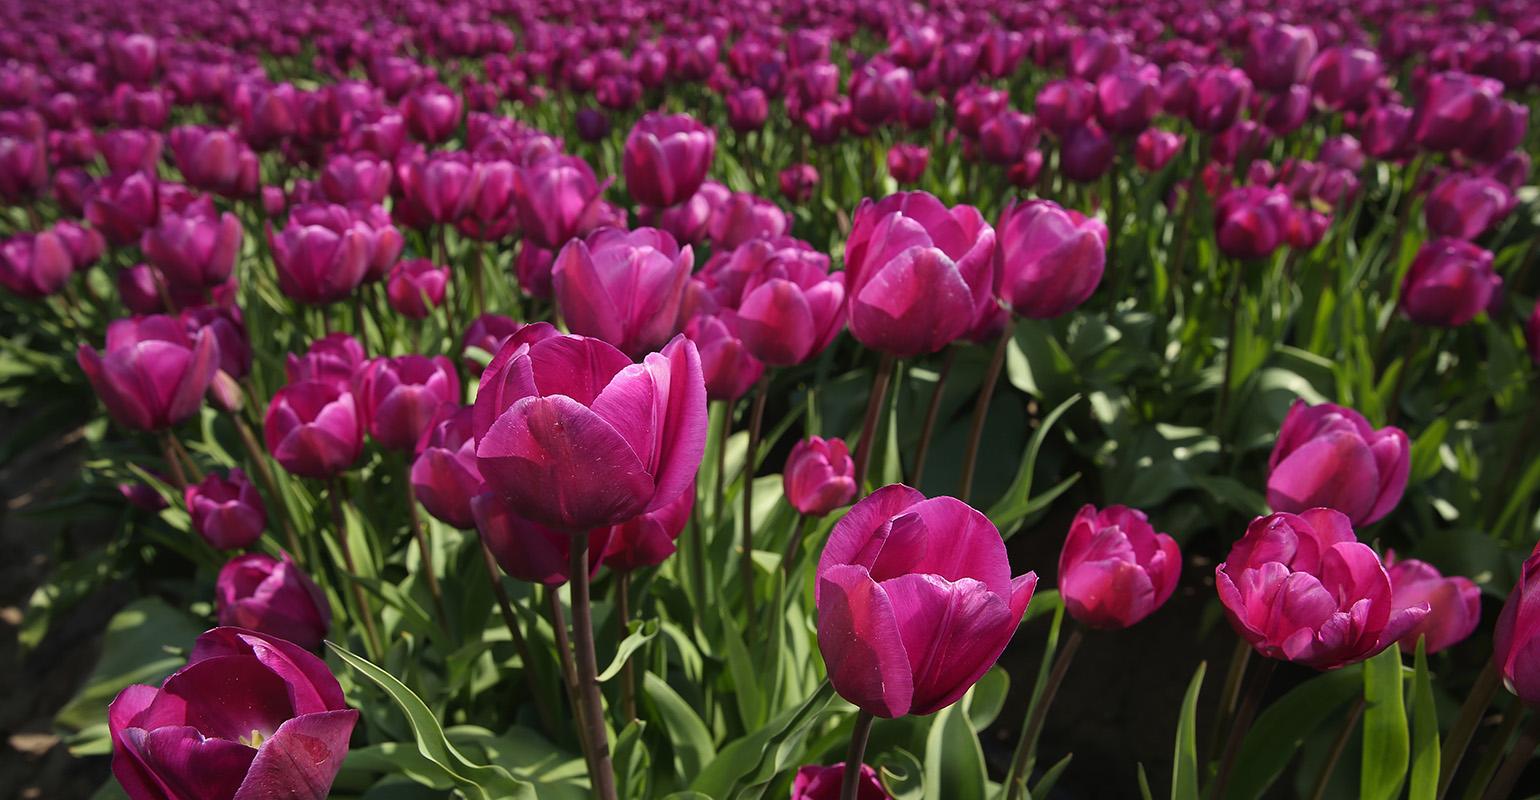 Is the Passive Indexing Craze the New Tulip Bulb Mania? | Wealth Management